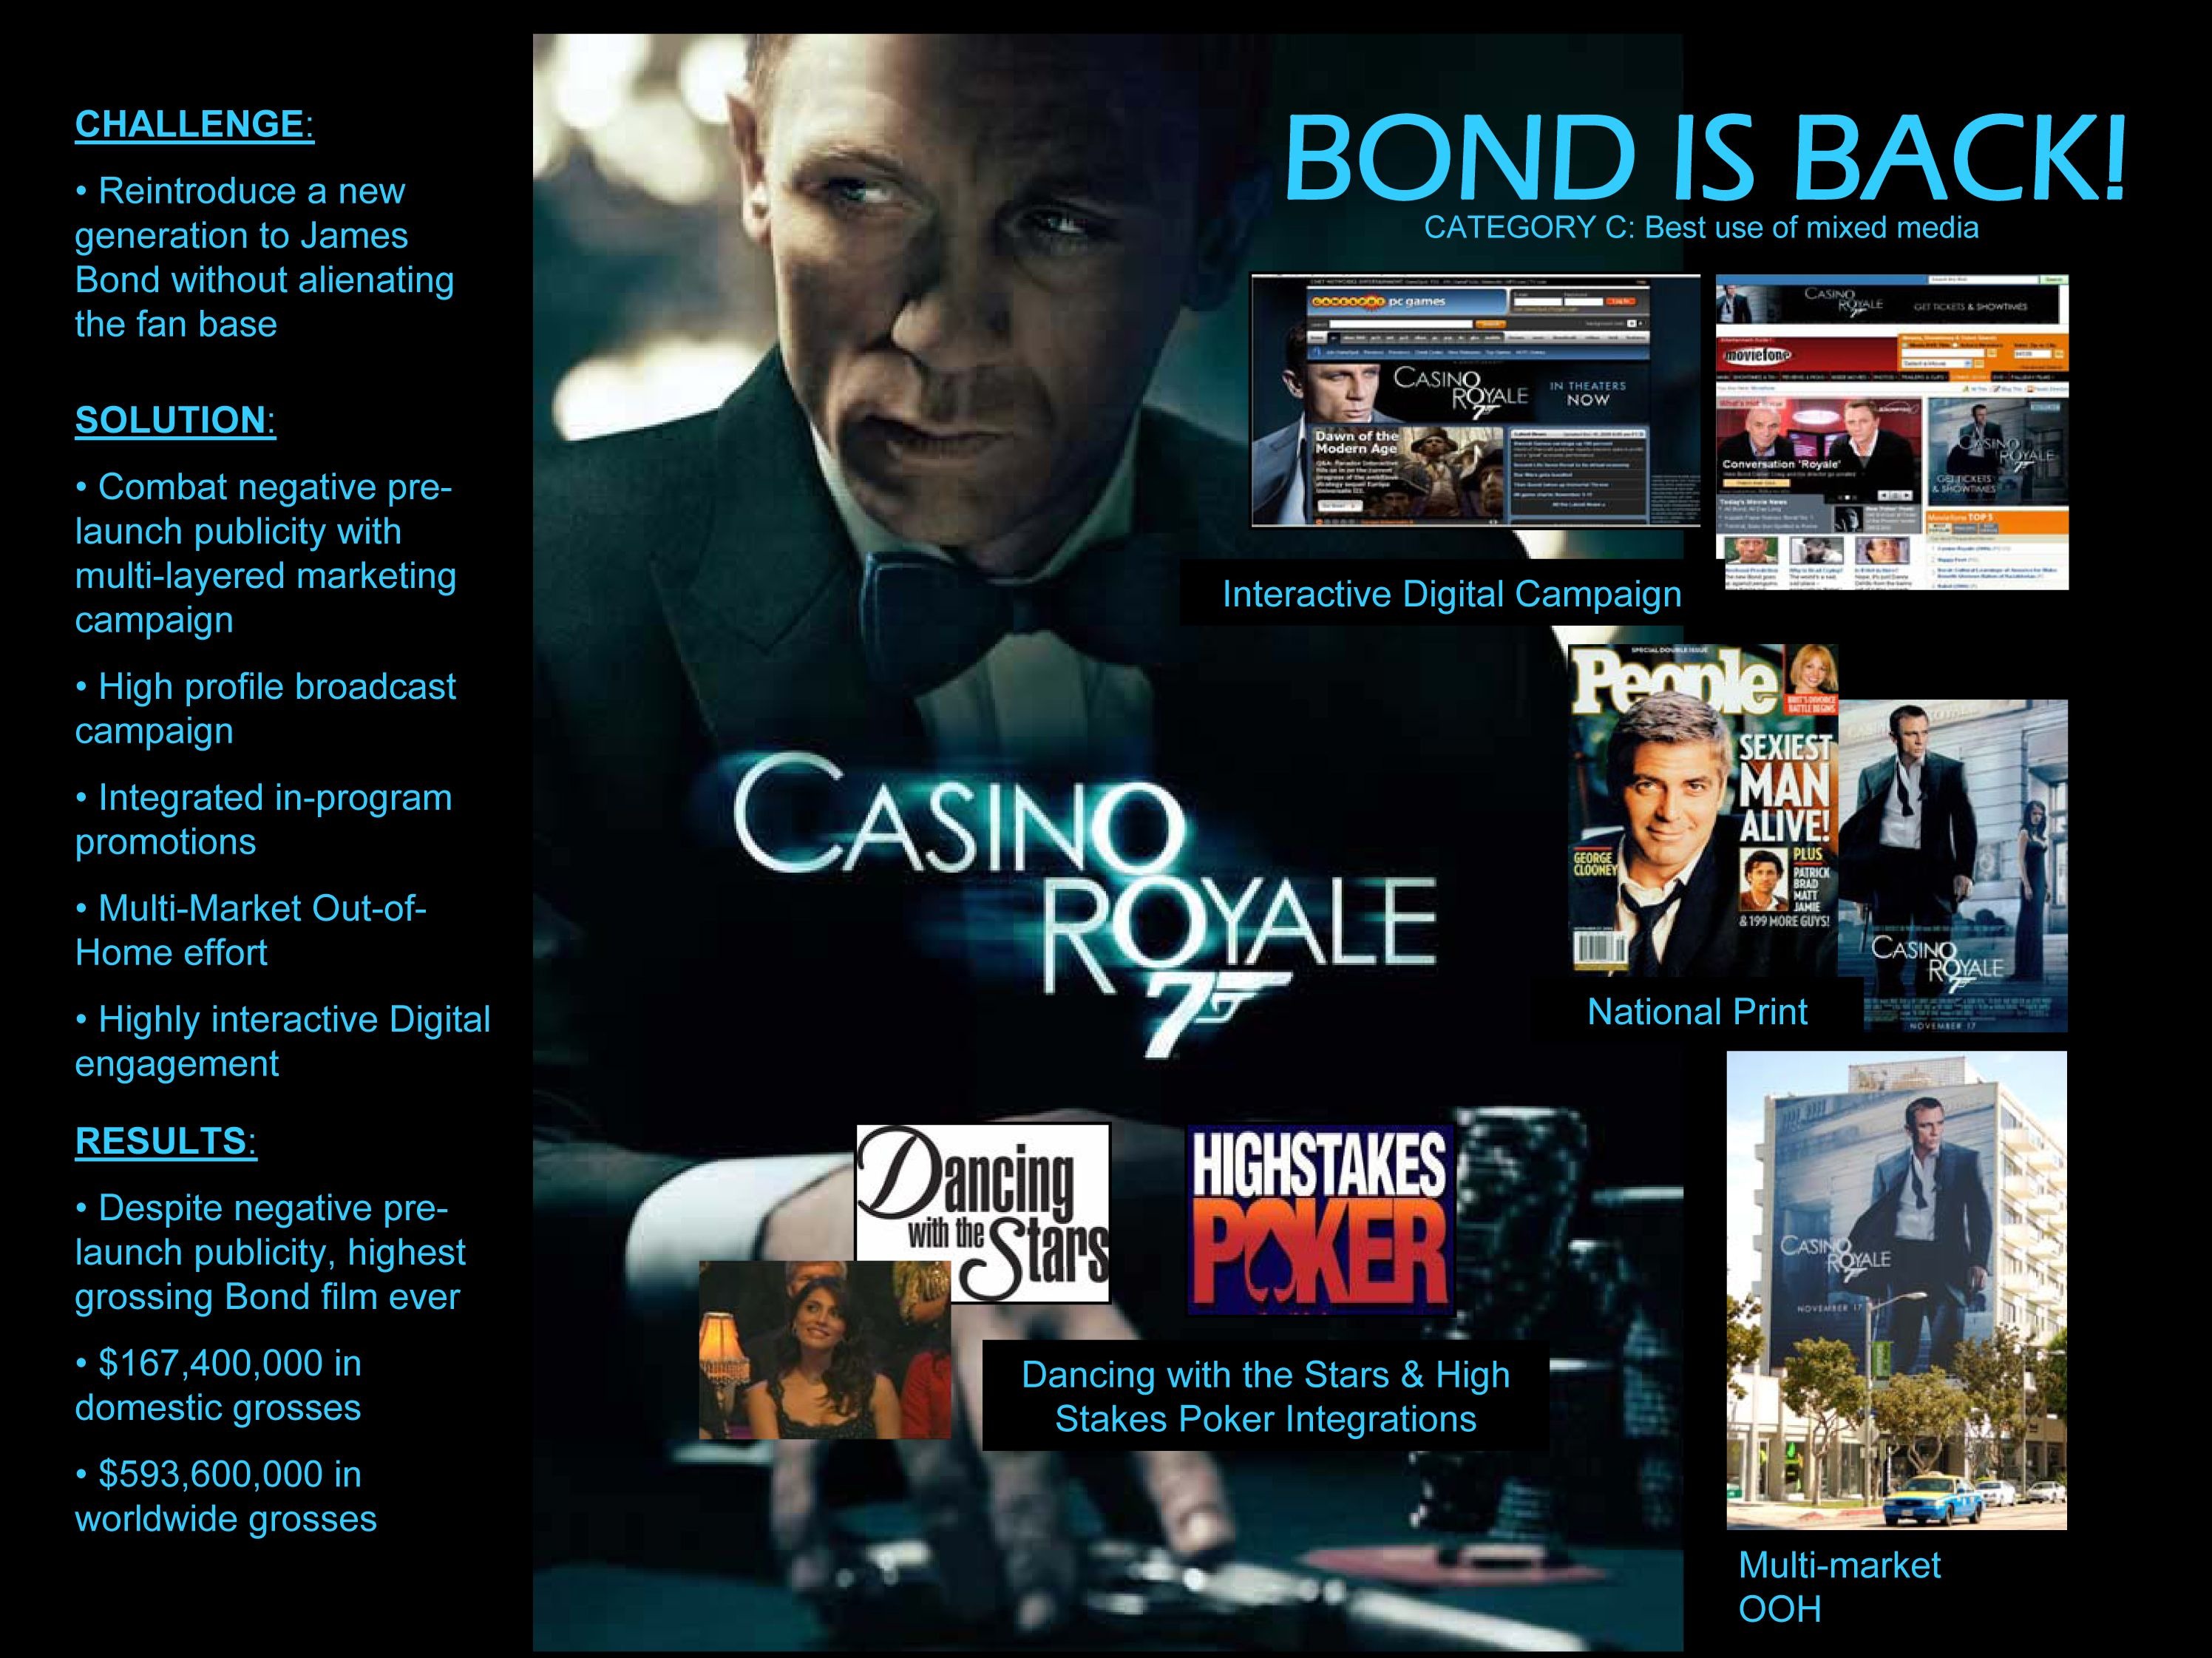 CASINO ROYALE MOTION PICTURE